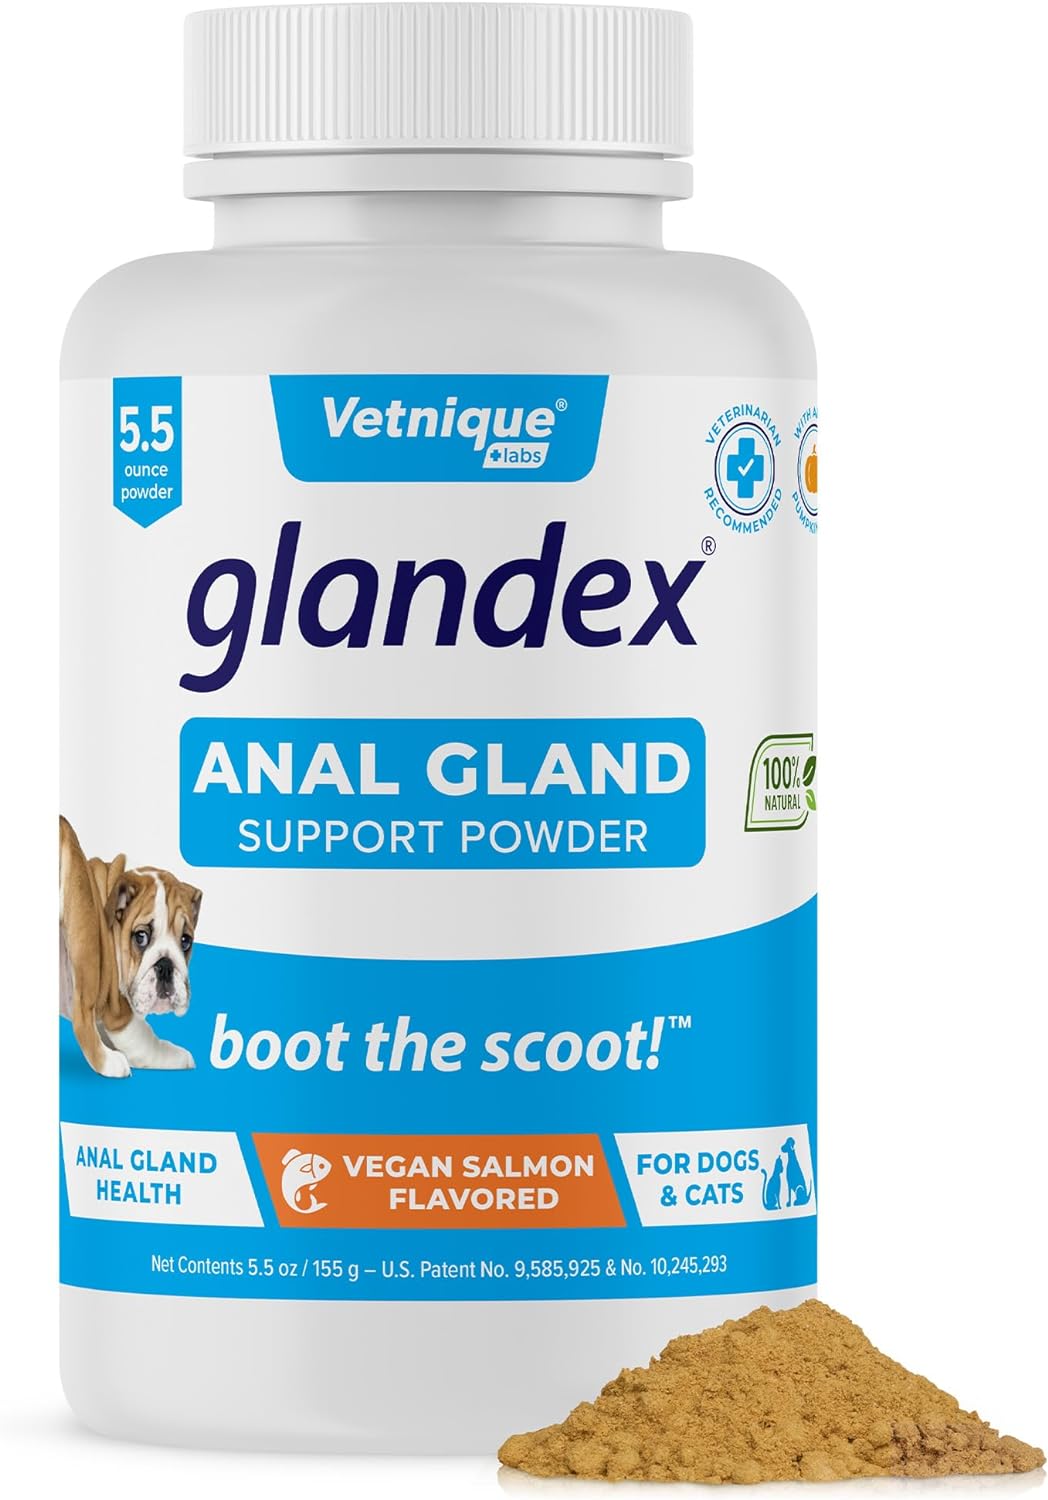 Glandex Dog Fiber Supplement Powder for Anal Glands with Pumpkin, Digestive Enzymes & Probiotics - Vet Recommended Healthy Bowels and Digestion - Boot The Scoot (Vegan Salmon, 5.5oz Powder)